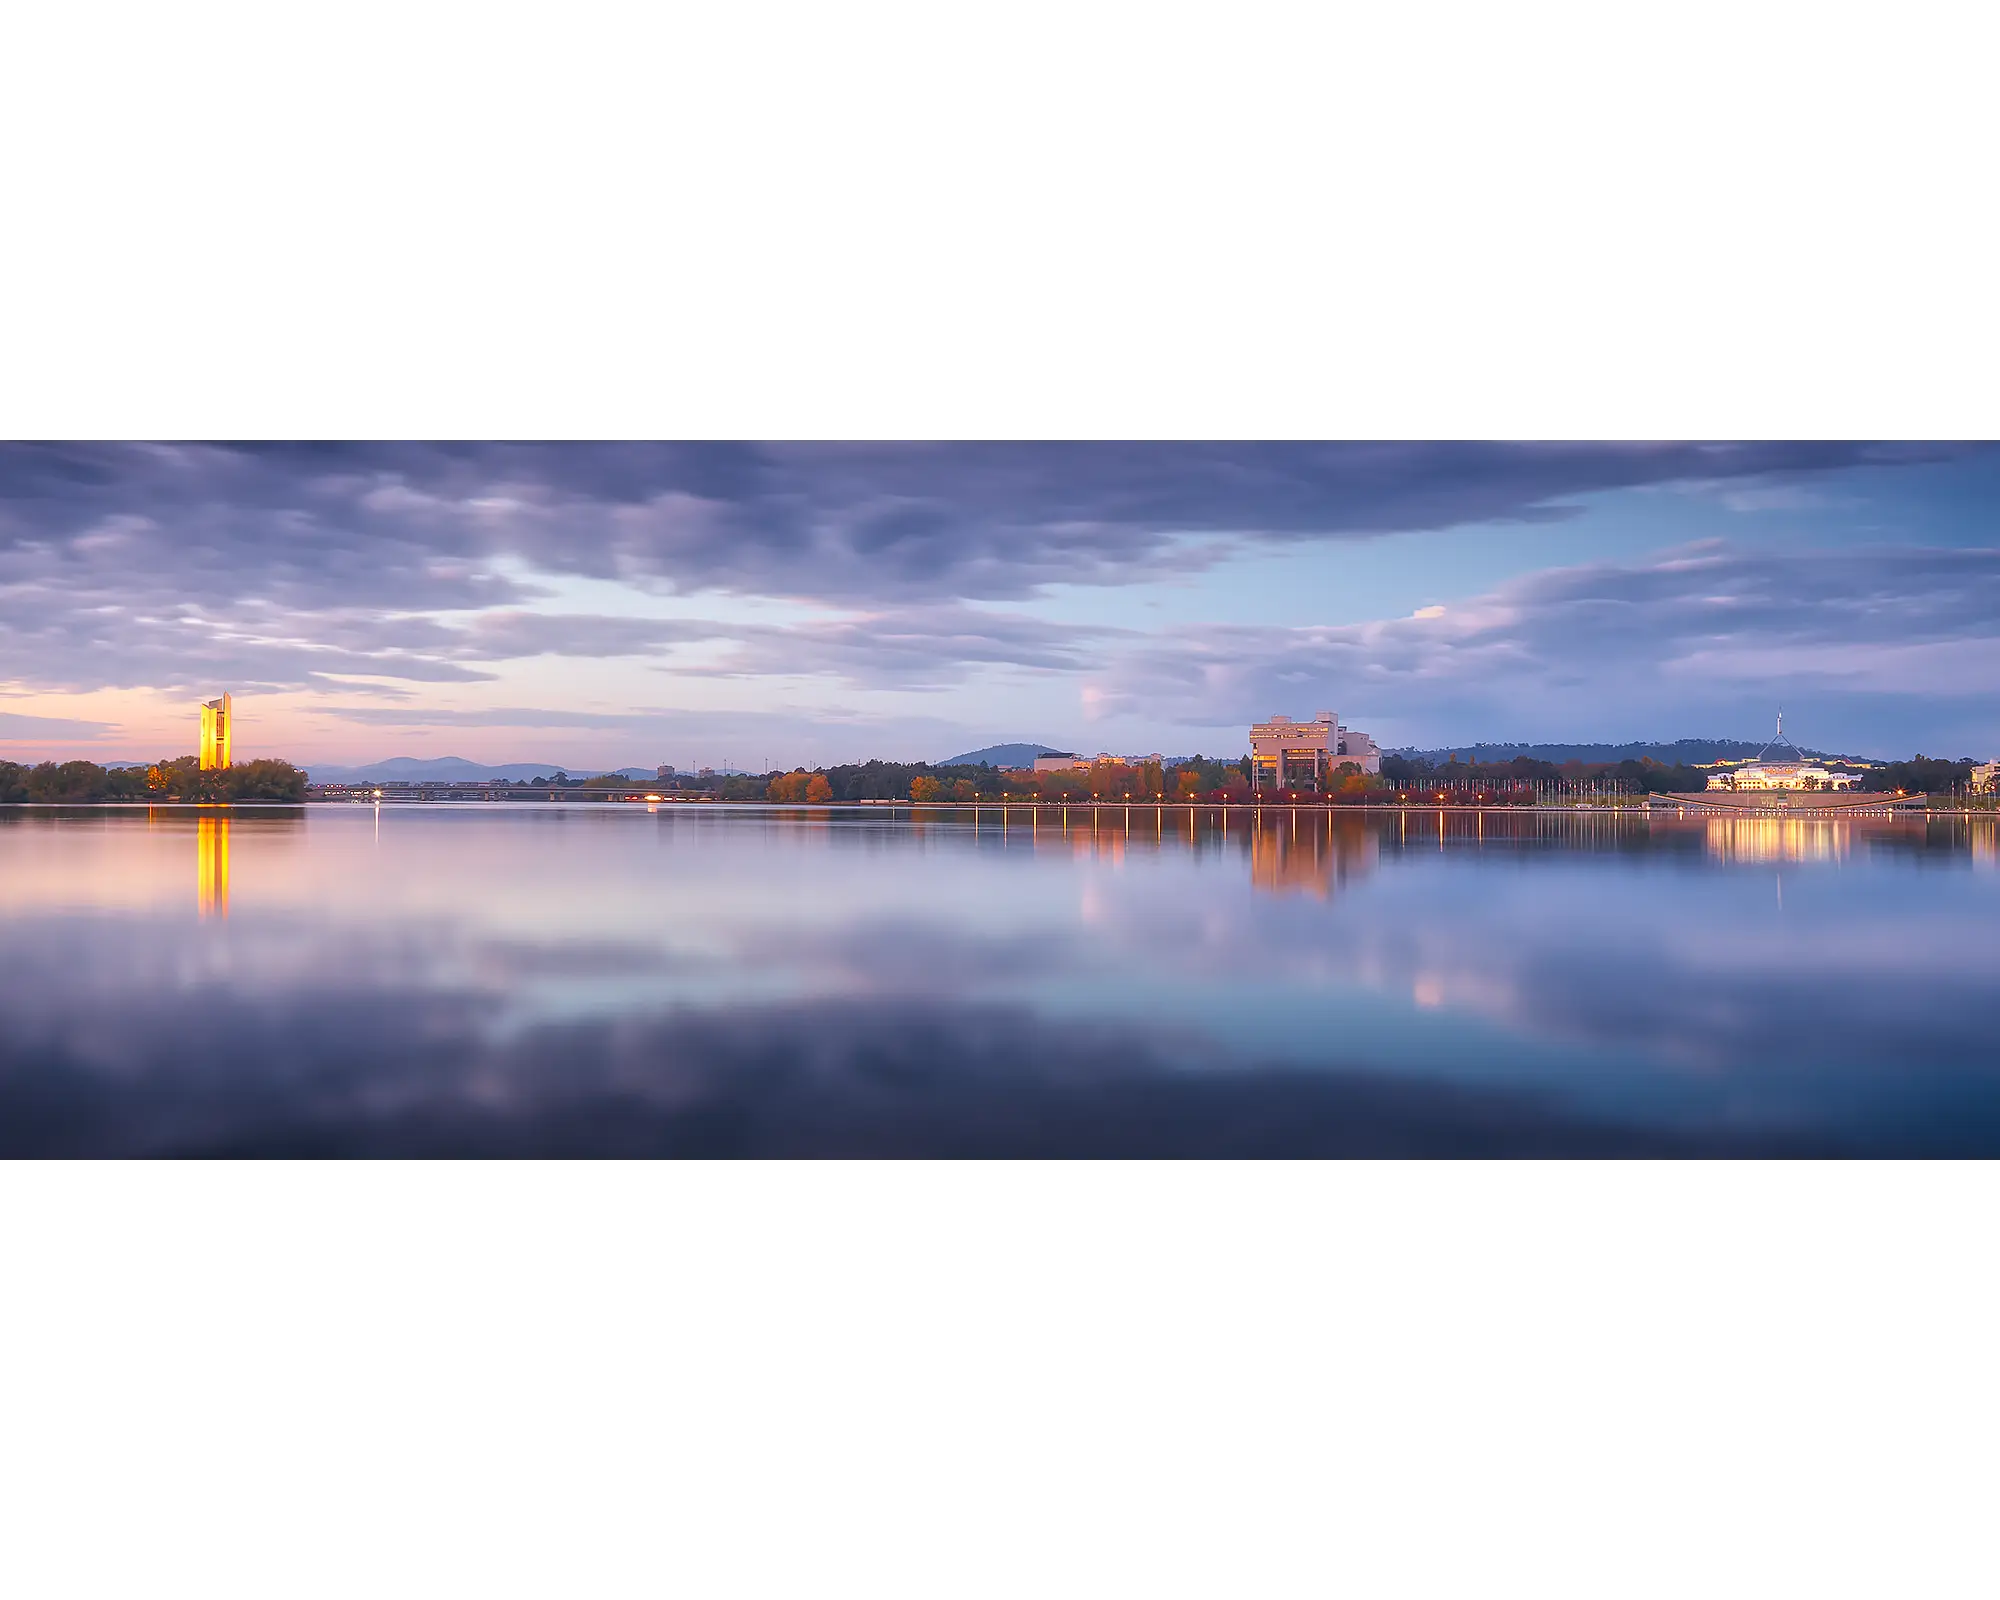 Still waters and cloudy skies moments before sunrise over Lake Burley Griffin.